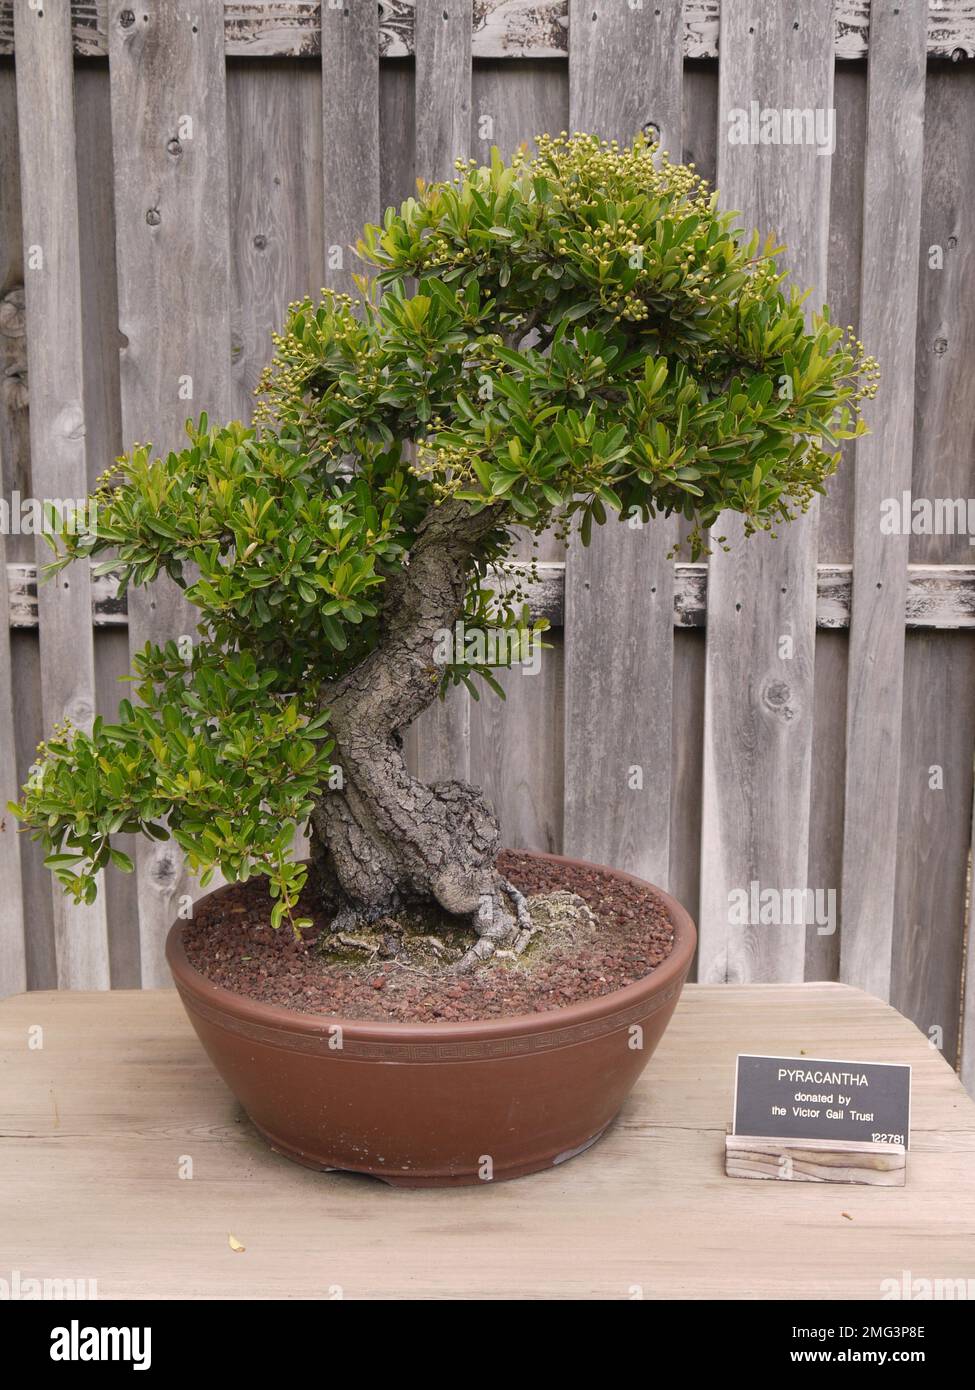 Bonsai Pyracantha (Firethorn), donated by the Victor Gail Trust to the Bonsai Collection at Huntington Botanical Gardens, San Marino Stock Photo